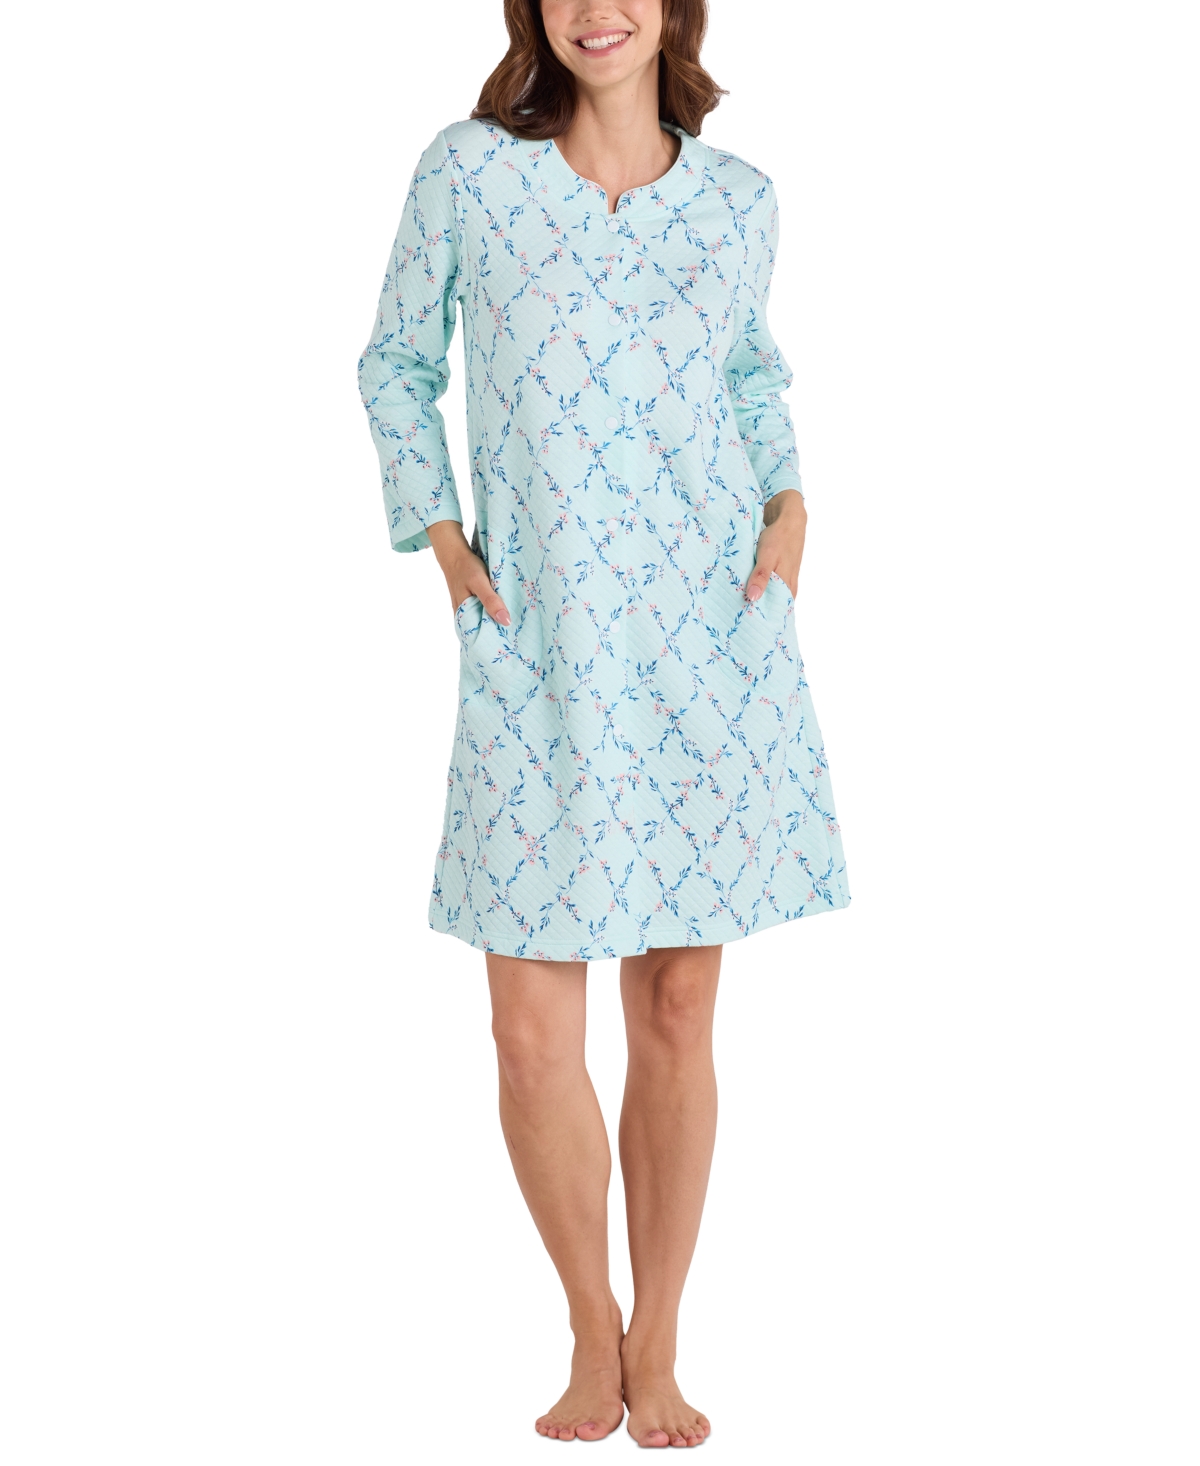 Women's Quilted Floral Long-Sleeve Robe - Mint Floral